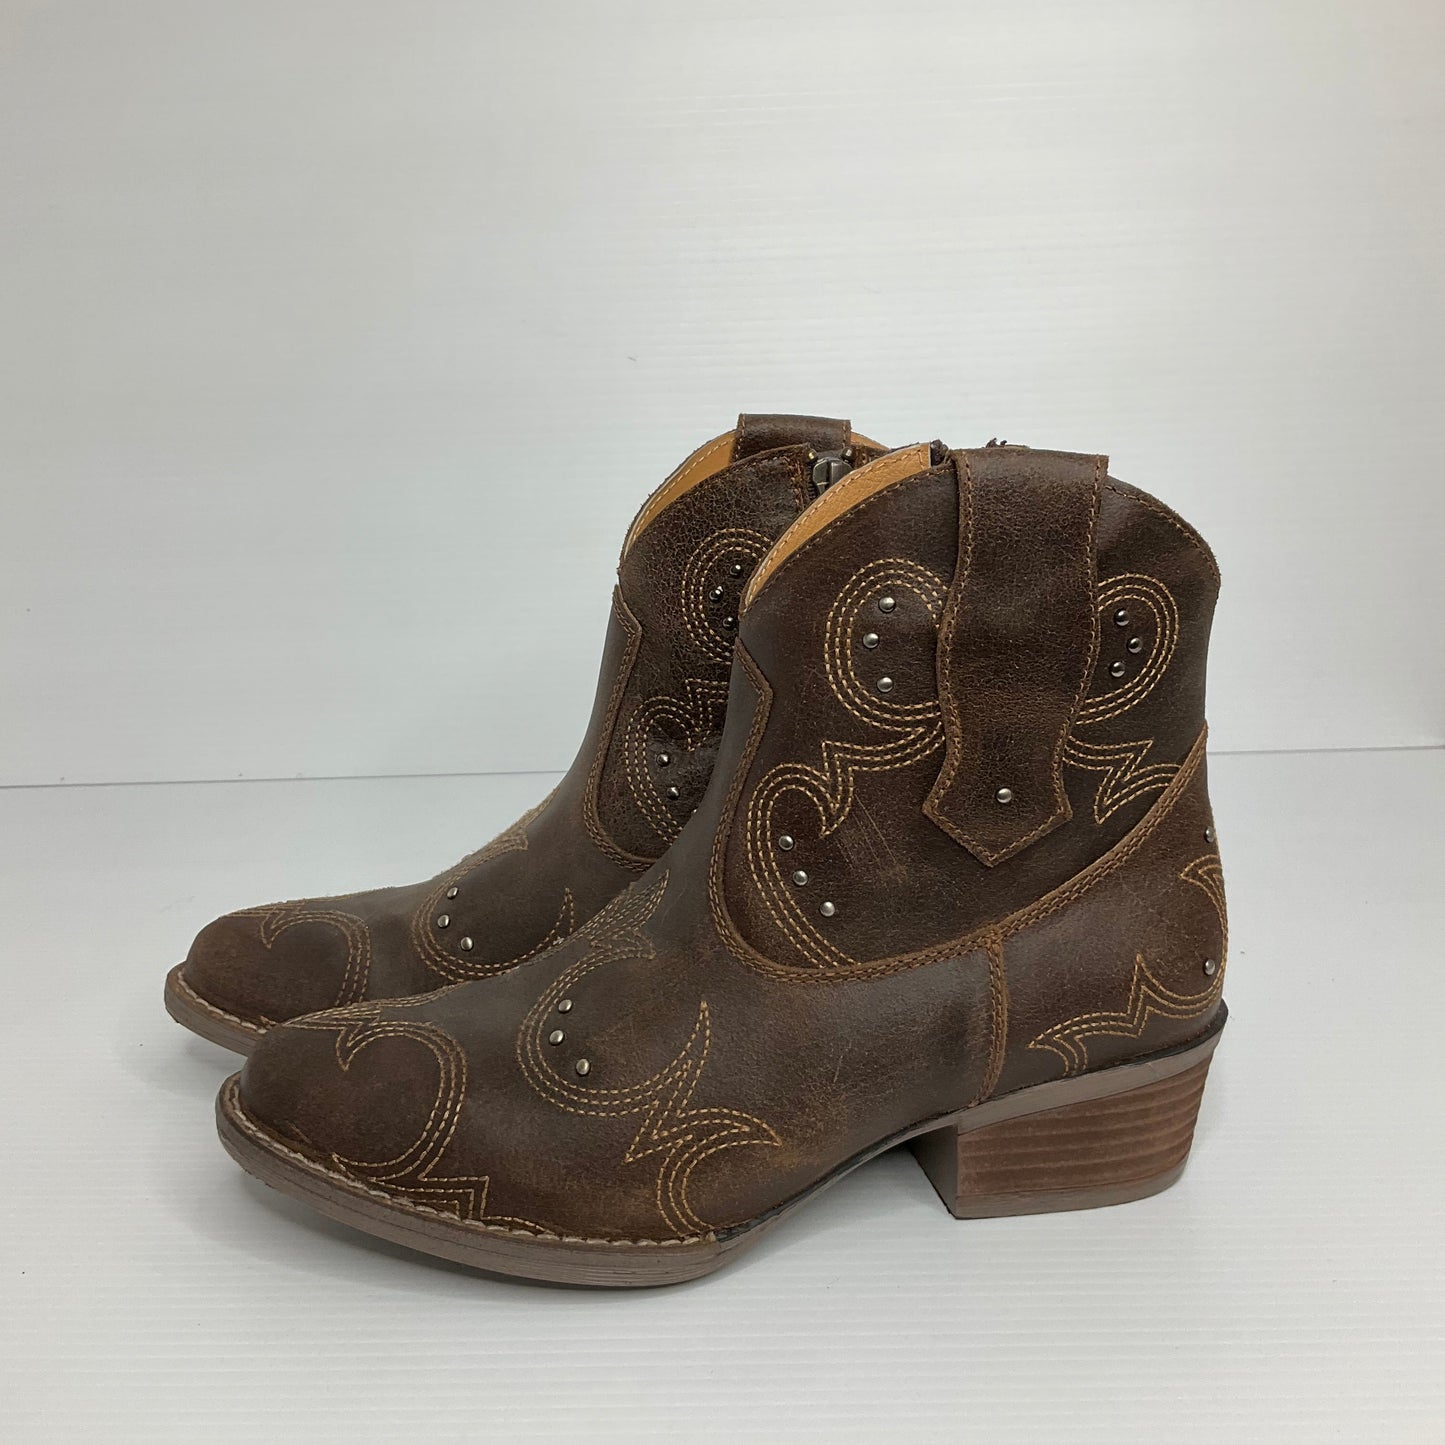 Brown Boots Western Cmb, Size 7.5